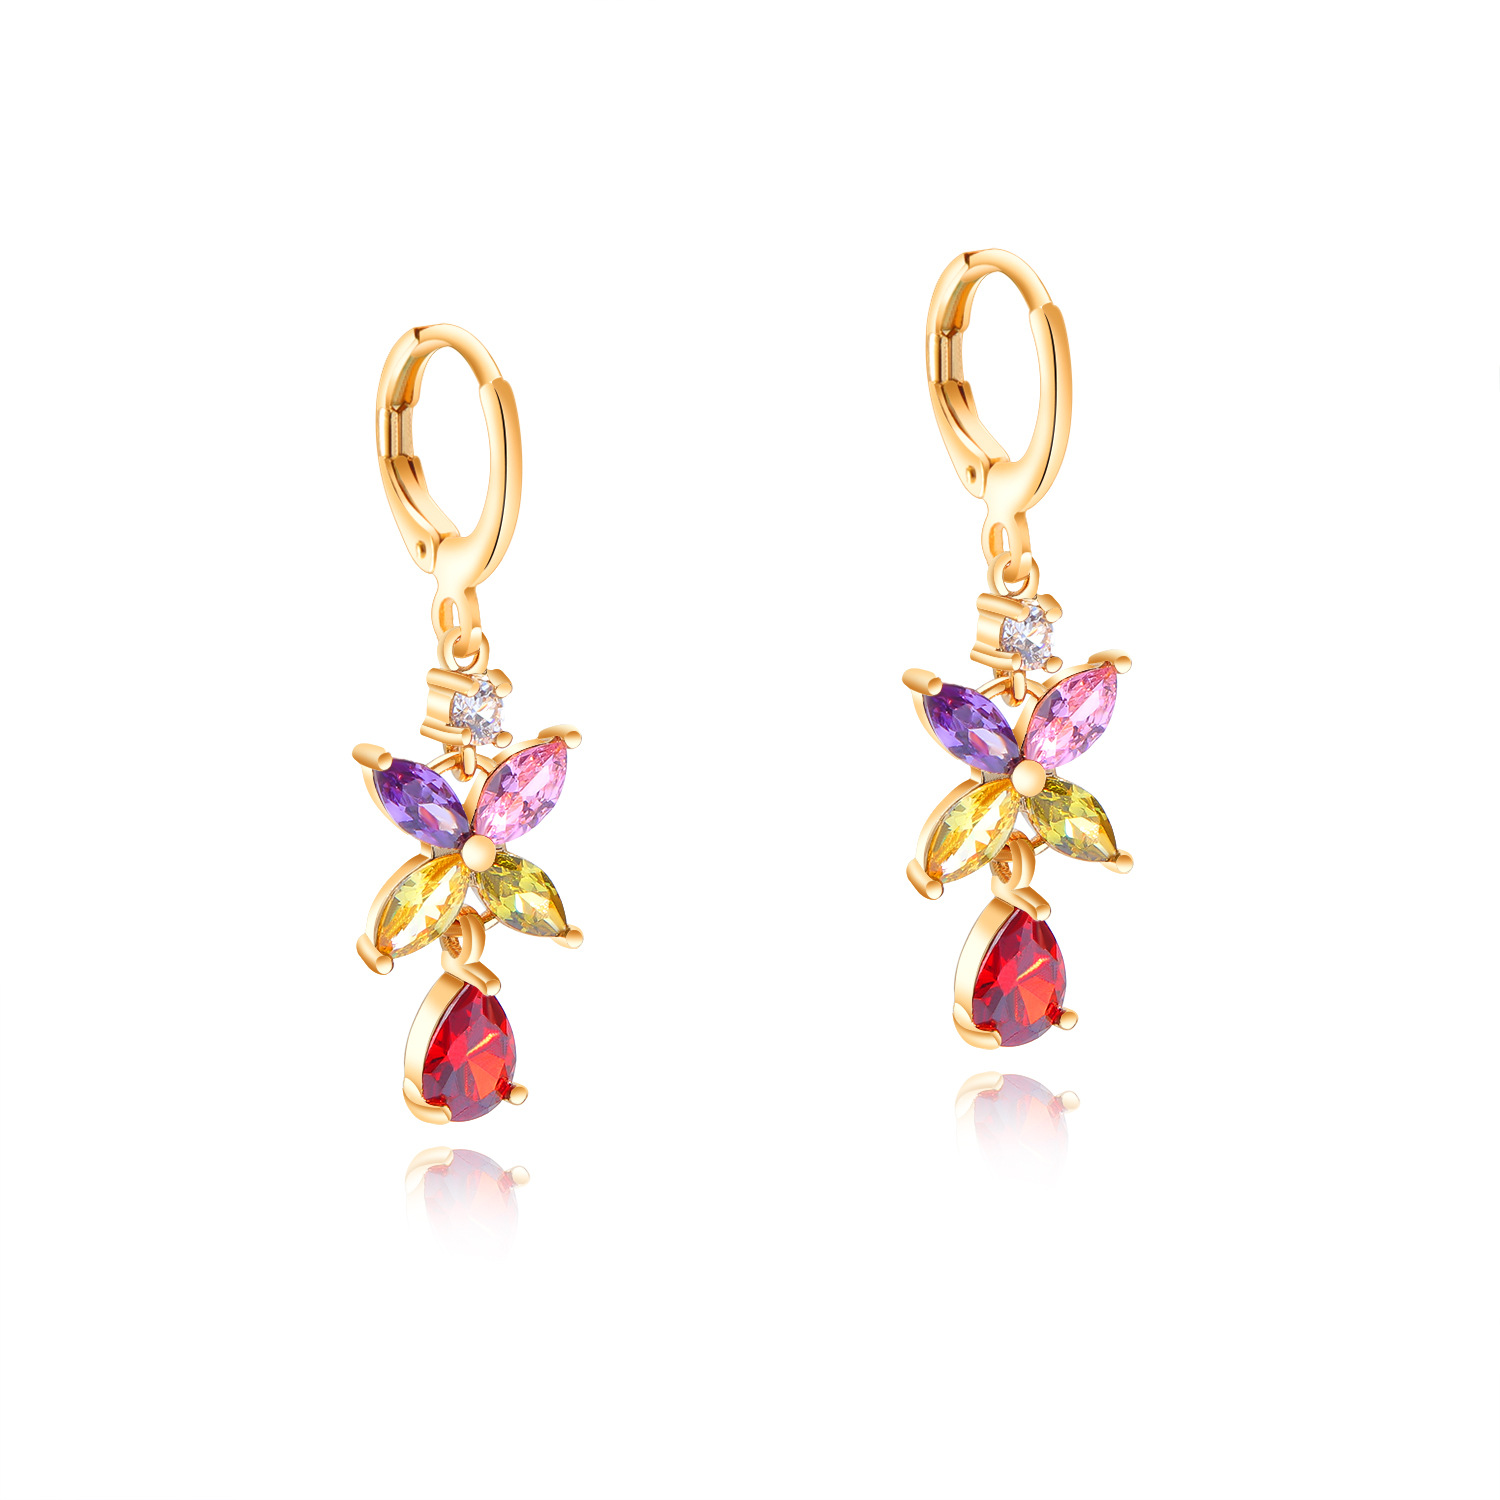 2 real gold plated with colorful rhinestone